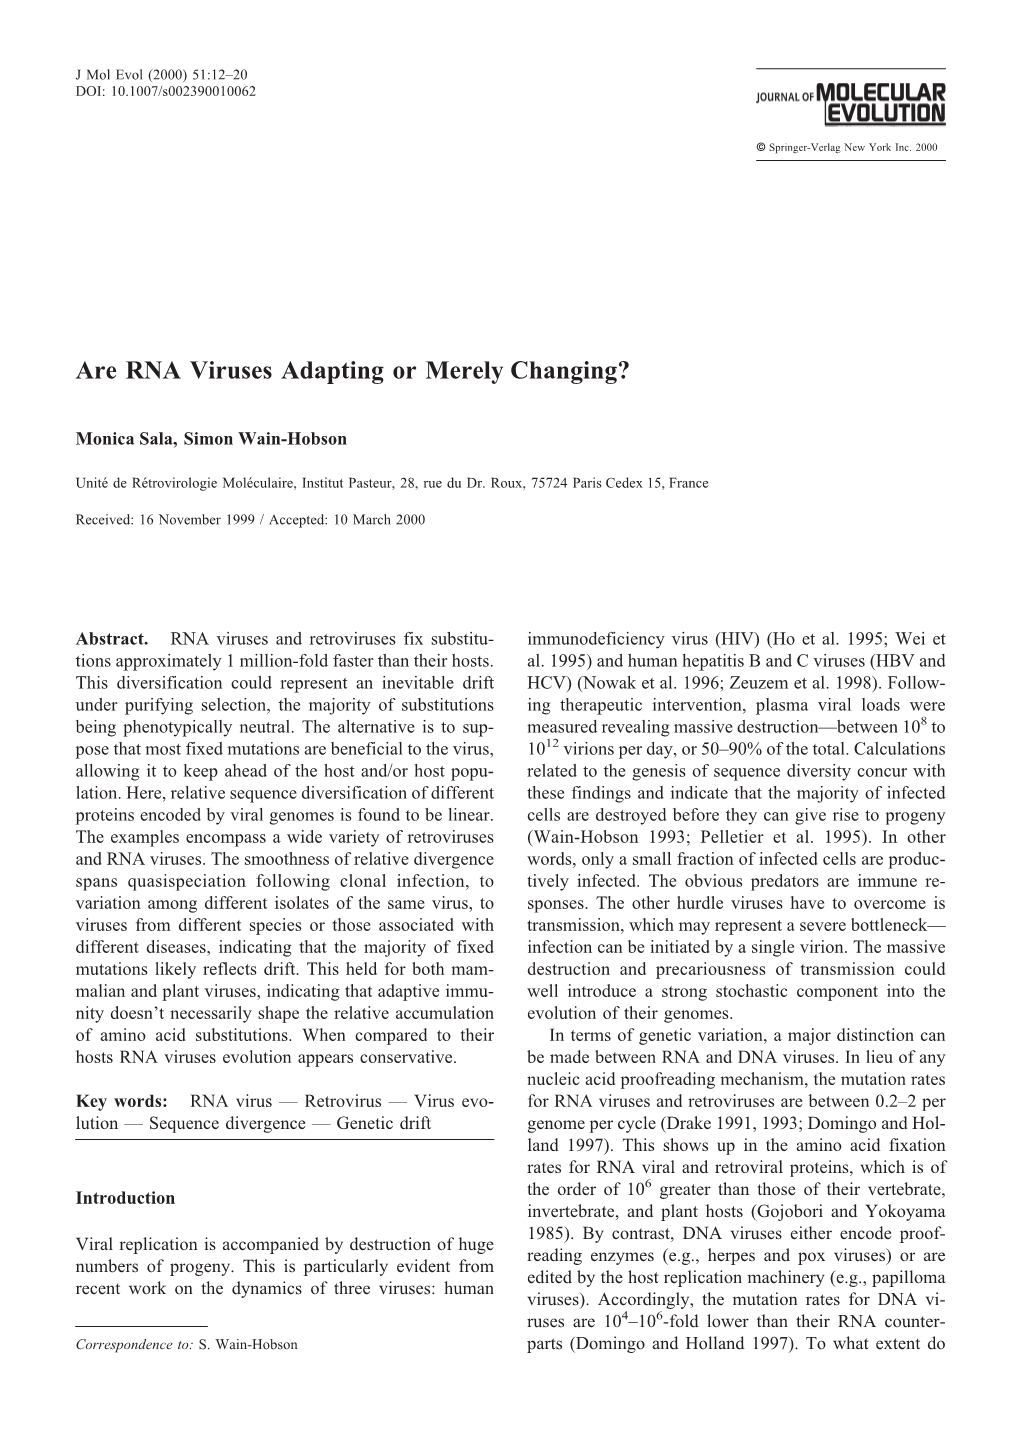 Are RNA Viruses Adapting Or Merely Changing?